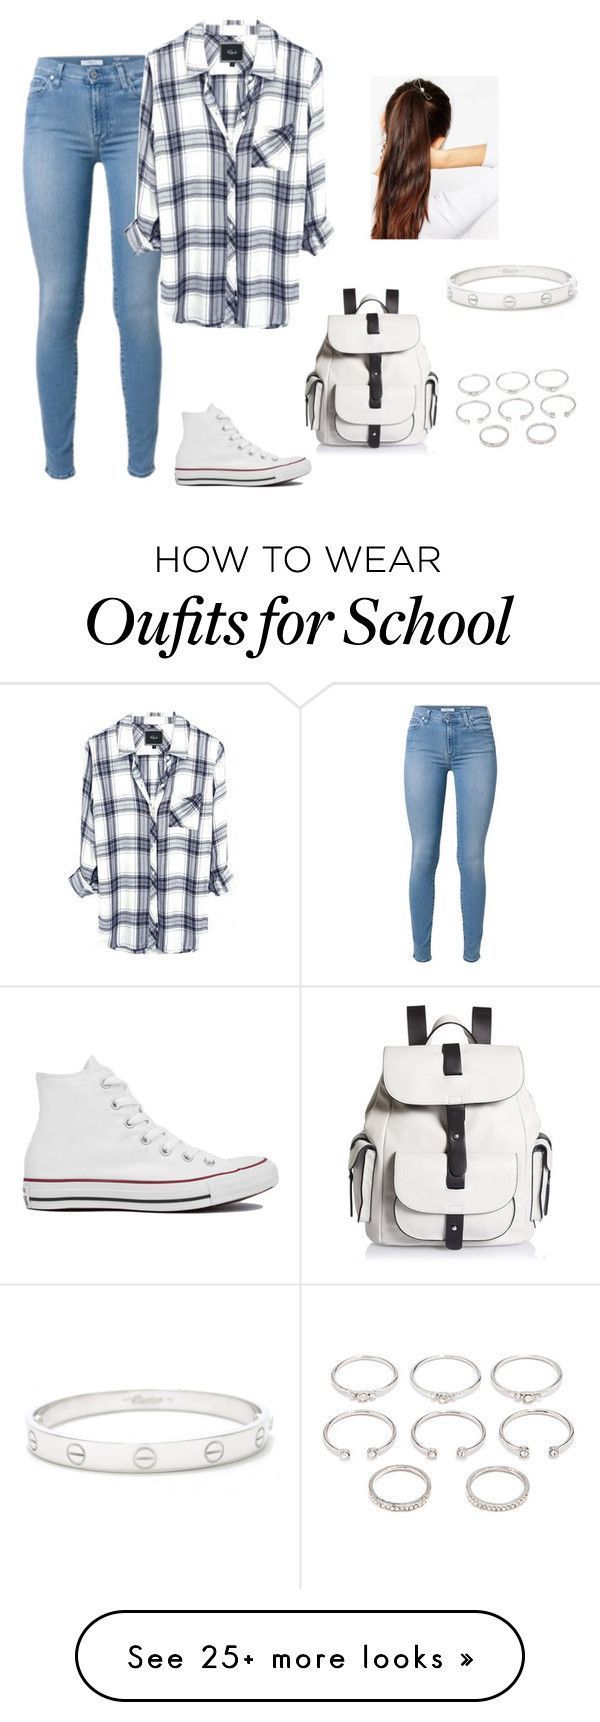 “Anather school day” by fashionlover4562 on Polyvore featuring Converse, Kenneth…